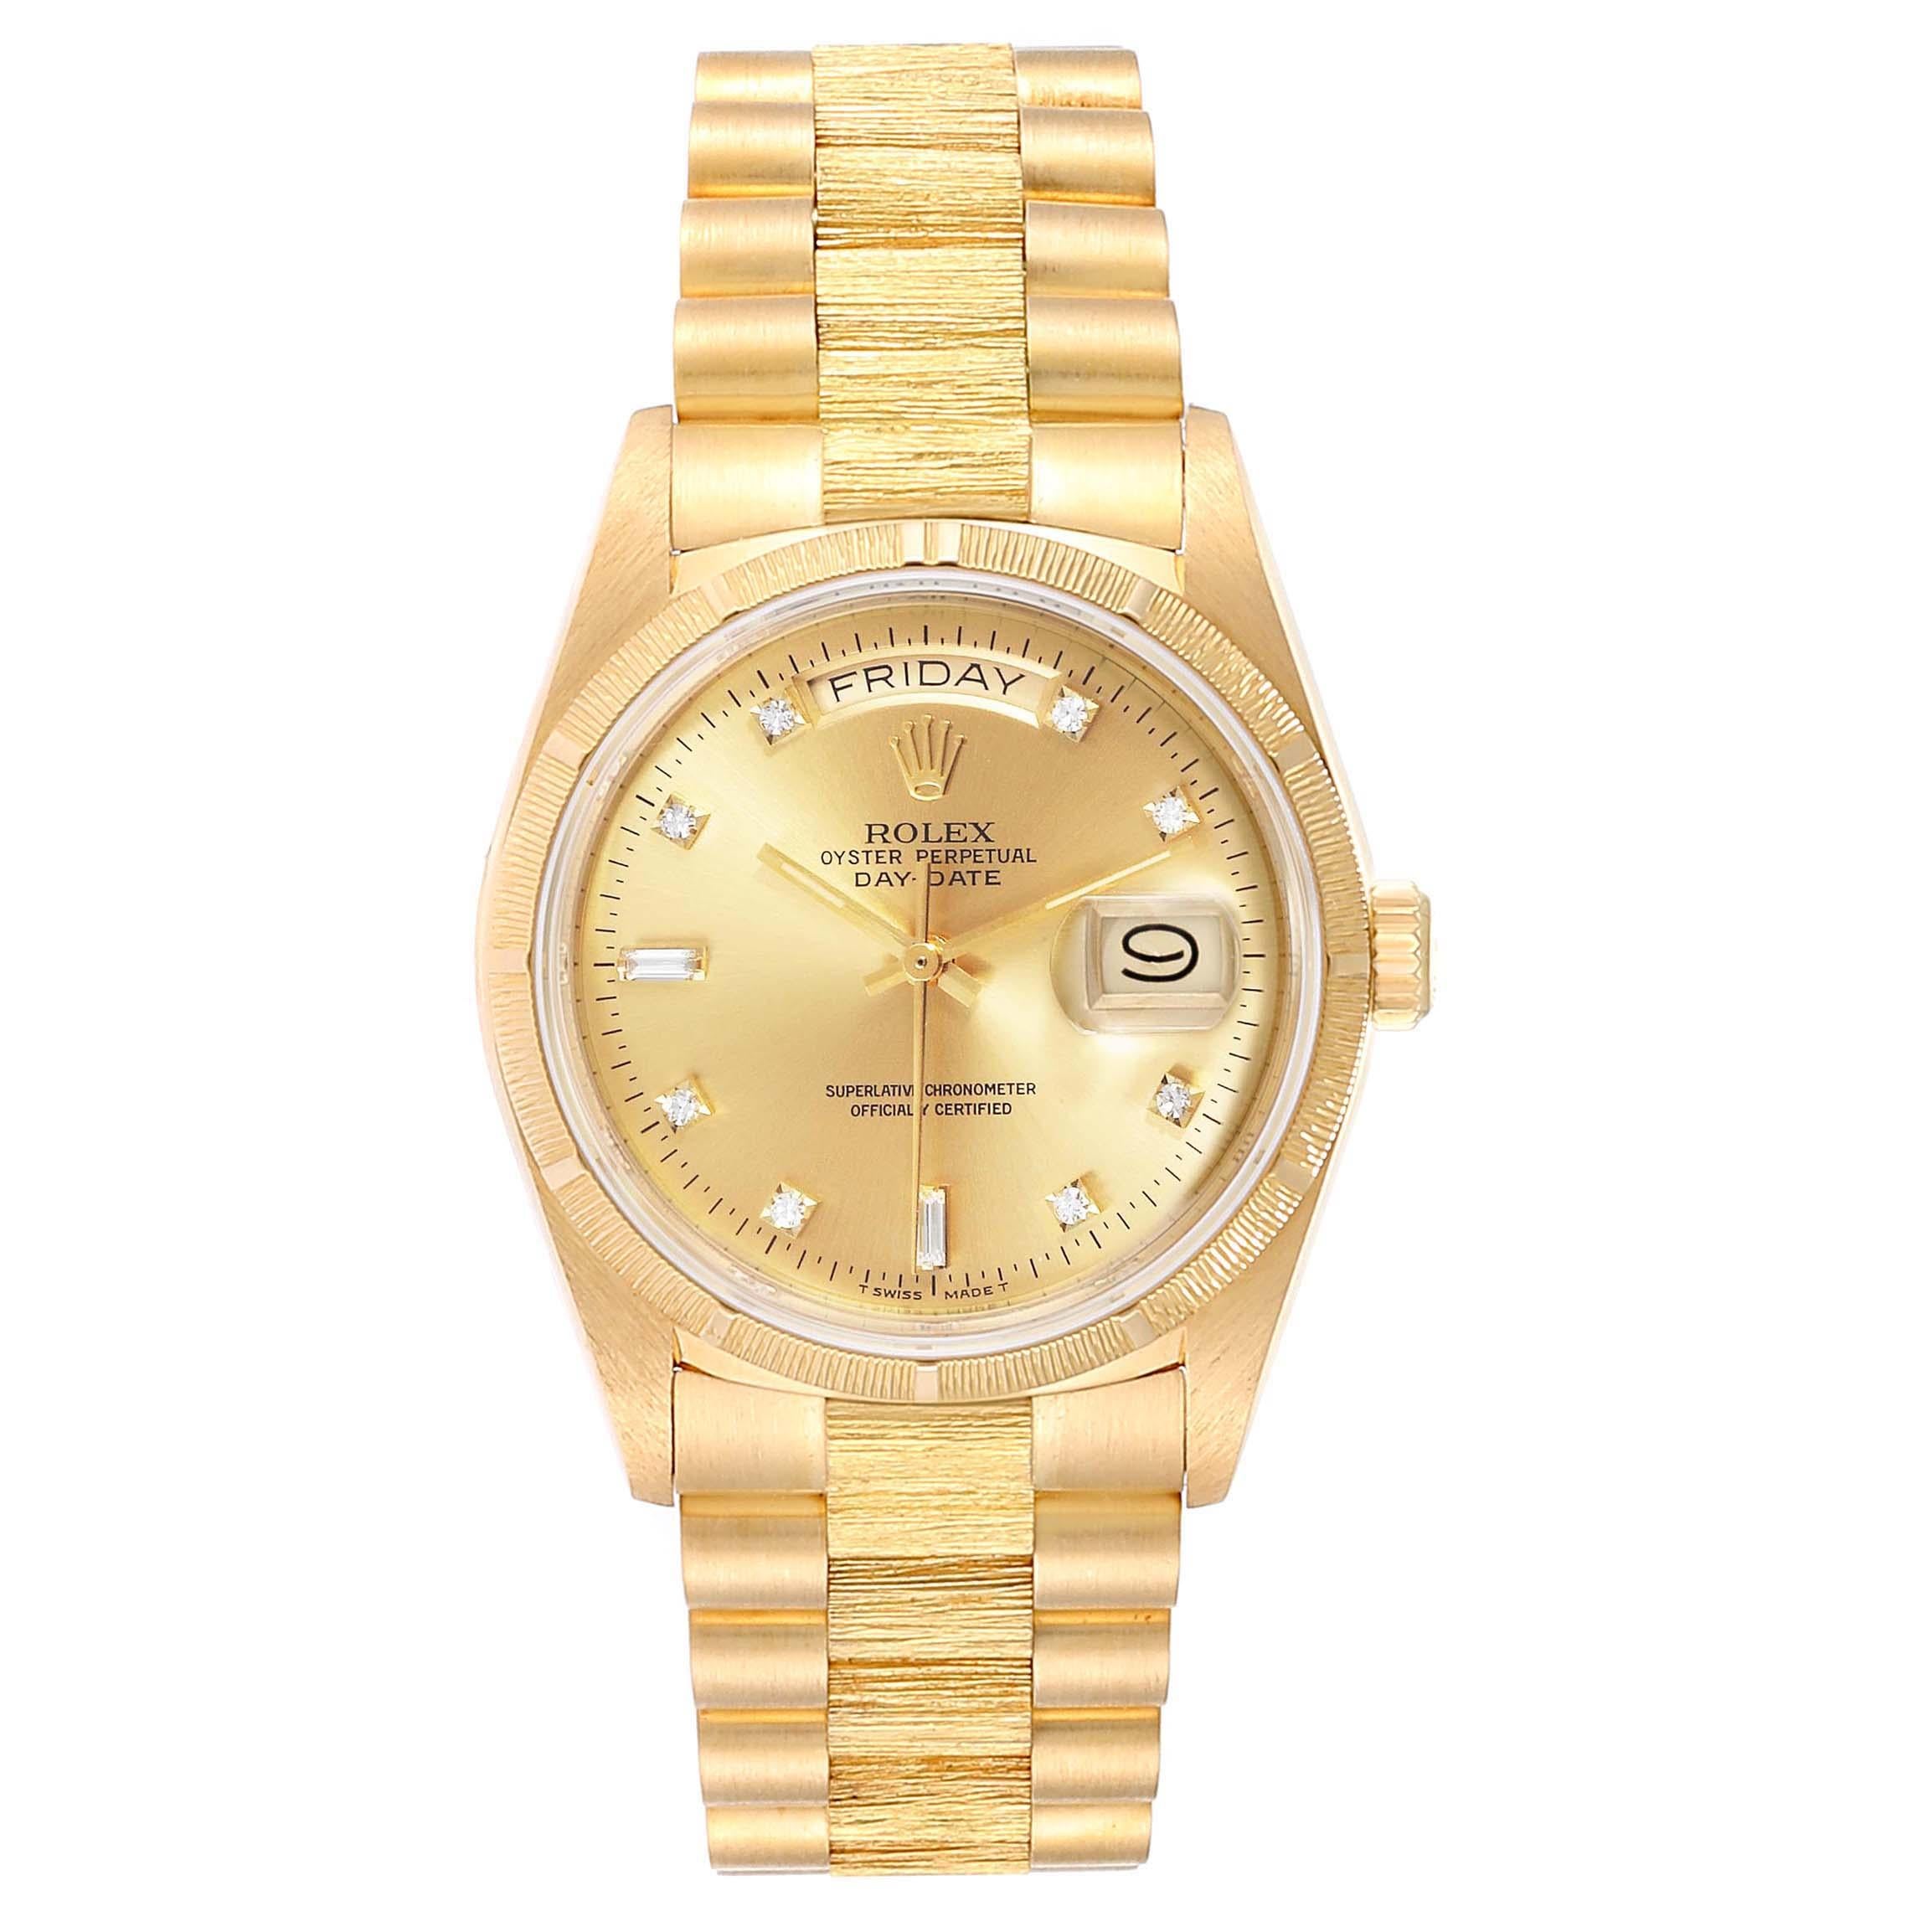 Rolex President Day-Date Yellow Gold Bark Finish Diamond Mens Watch 18078. Officially certified chronometer self-winding movement. 18k yellow gold oyster case 36.0 mm in diameter. Rolex logo on a crown. 18k yellow gold bark finish bezel. Scratch